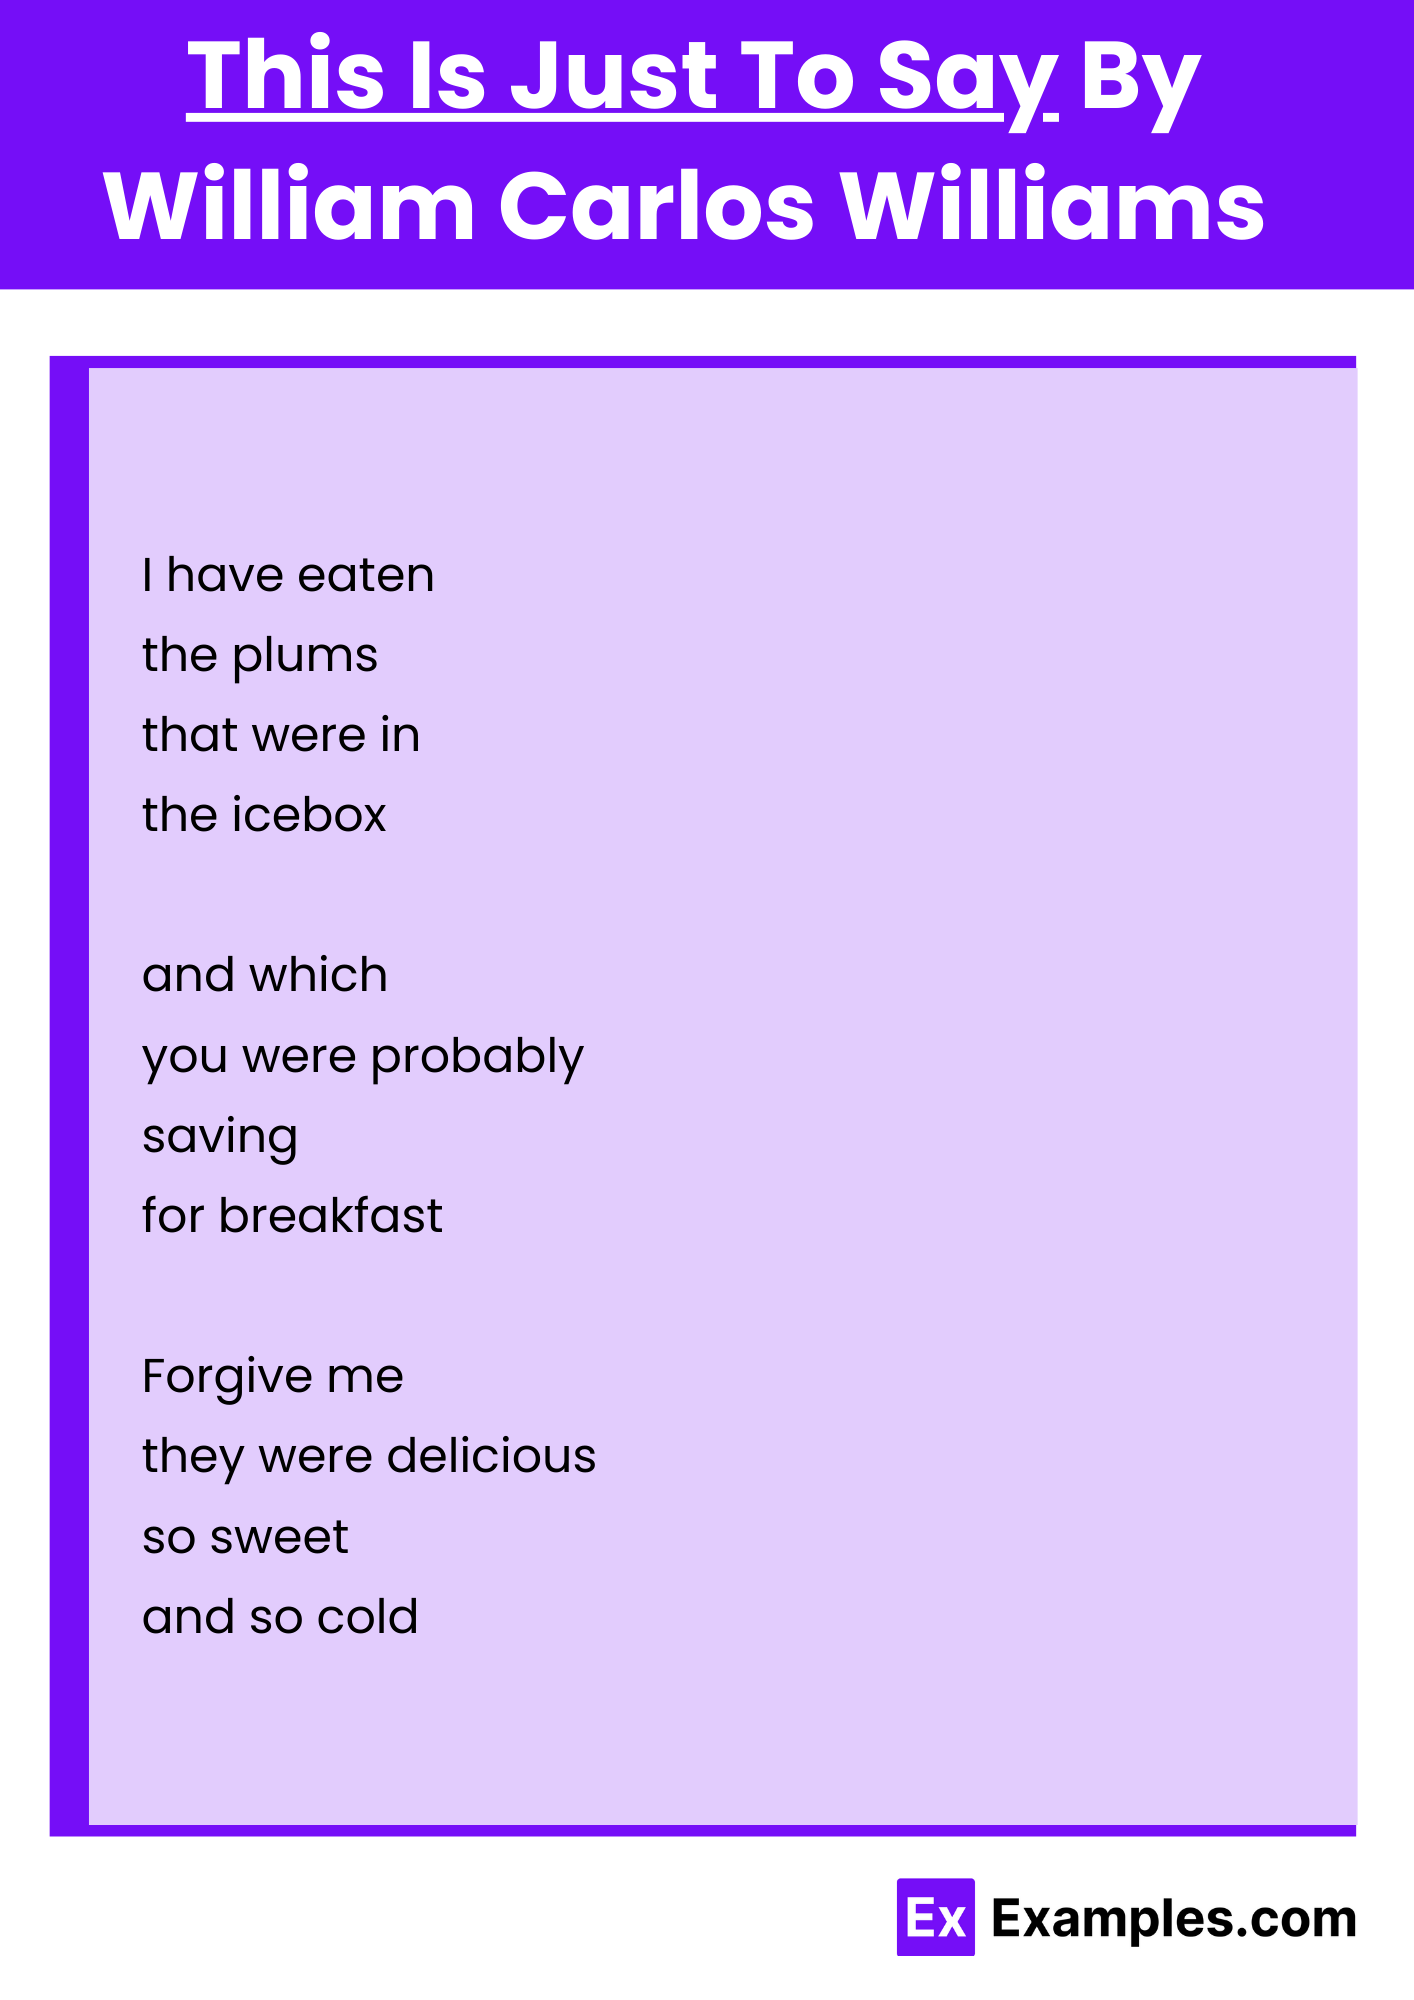 This Is Just To Say By William Carlos Williams